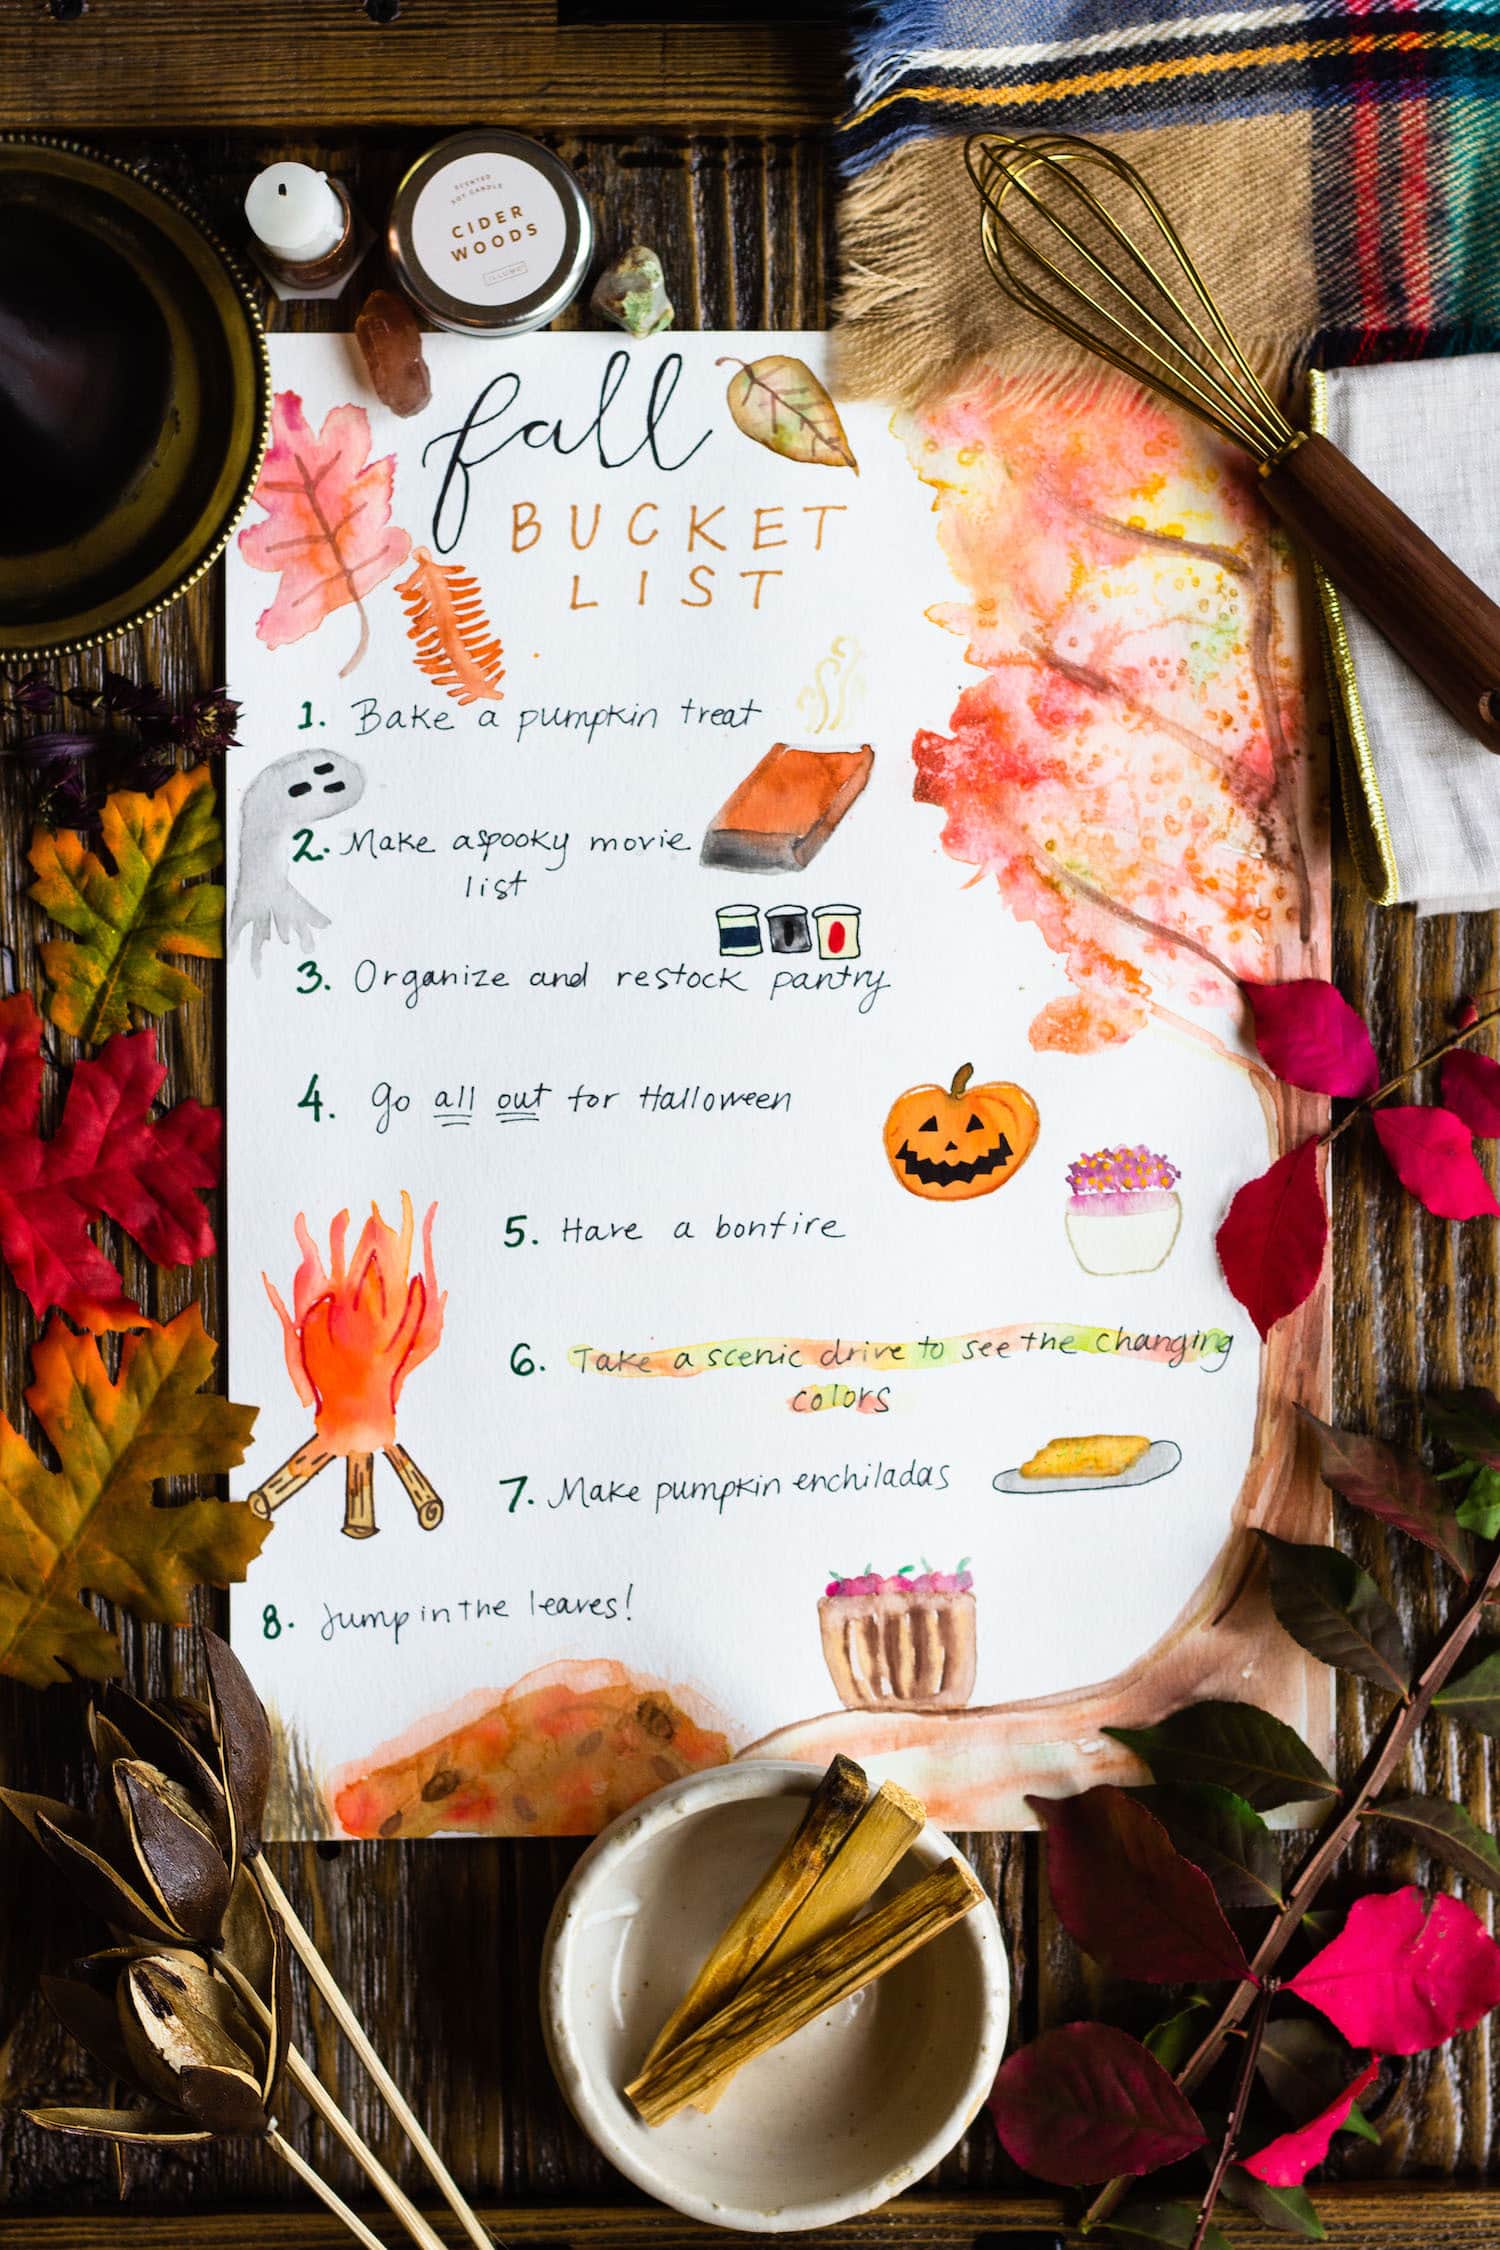 Things to check off your Fall Bucket List!